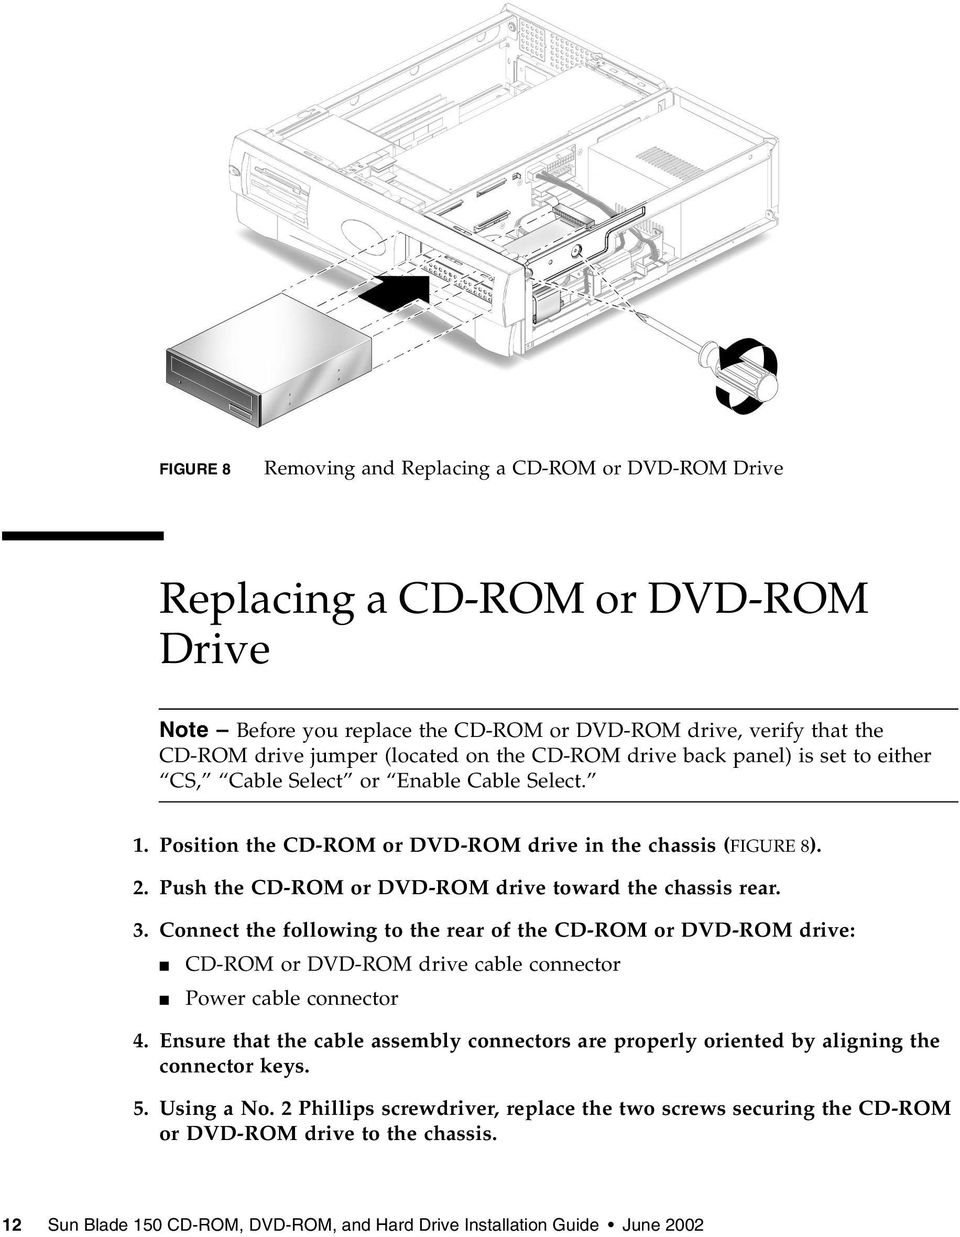 Push the CD-ROM or DVD-ROM drive toward the chassis rear. 3. Connect the following to the rear of the CD-ROM or DVD-ROM drive: CD-ROM or DVD-ROM drive cable connector Power cable connector 4.